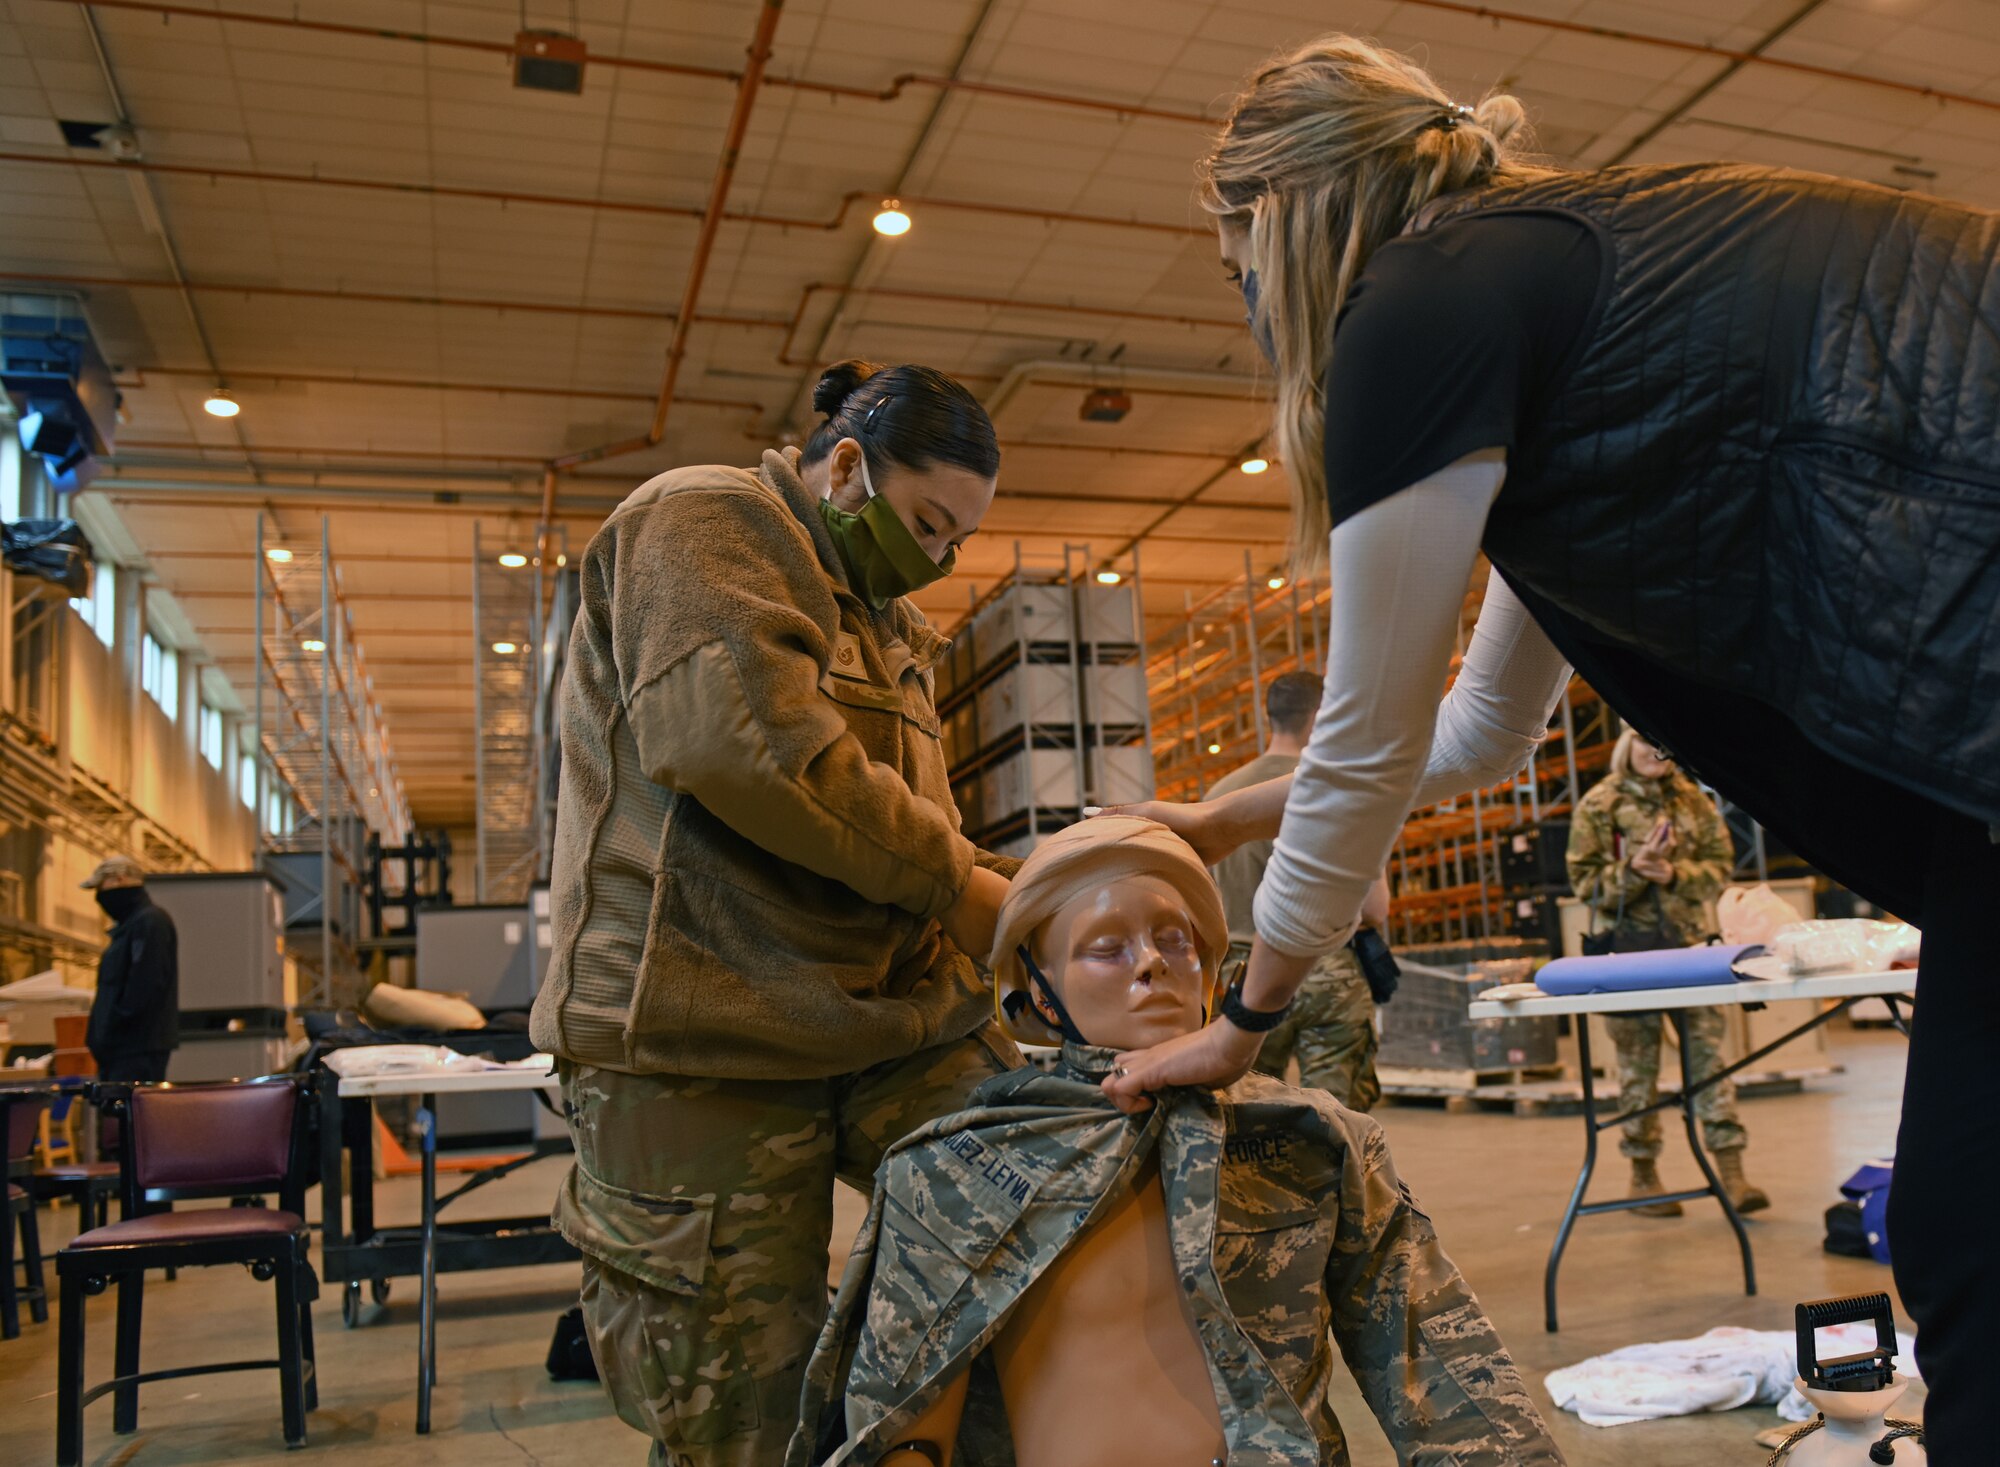 Tech. Sgt. Angela Kim, emergency medical service program manager at the 48th Medical Group, prepares a medical simulation manikin for Mission Assurance Exercise 20-20 at Royal Air Force Feltwell, England, Sept. 29, 2020. During the exercise, medical personnel received unique training and challenged their proficiency, practicing medical skills and procedures while treating simulated injuries in a forward operating location. (U.S. Air Force photo by Airman 1st Class Rhonda Smith)